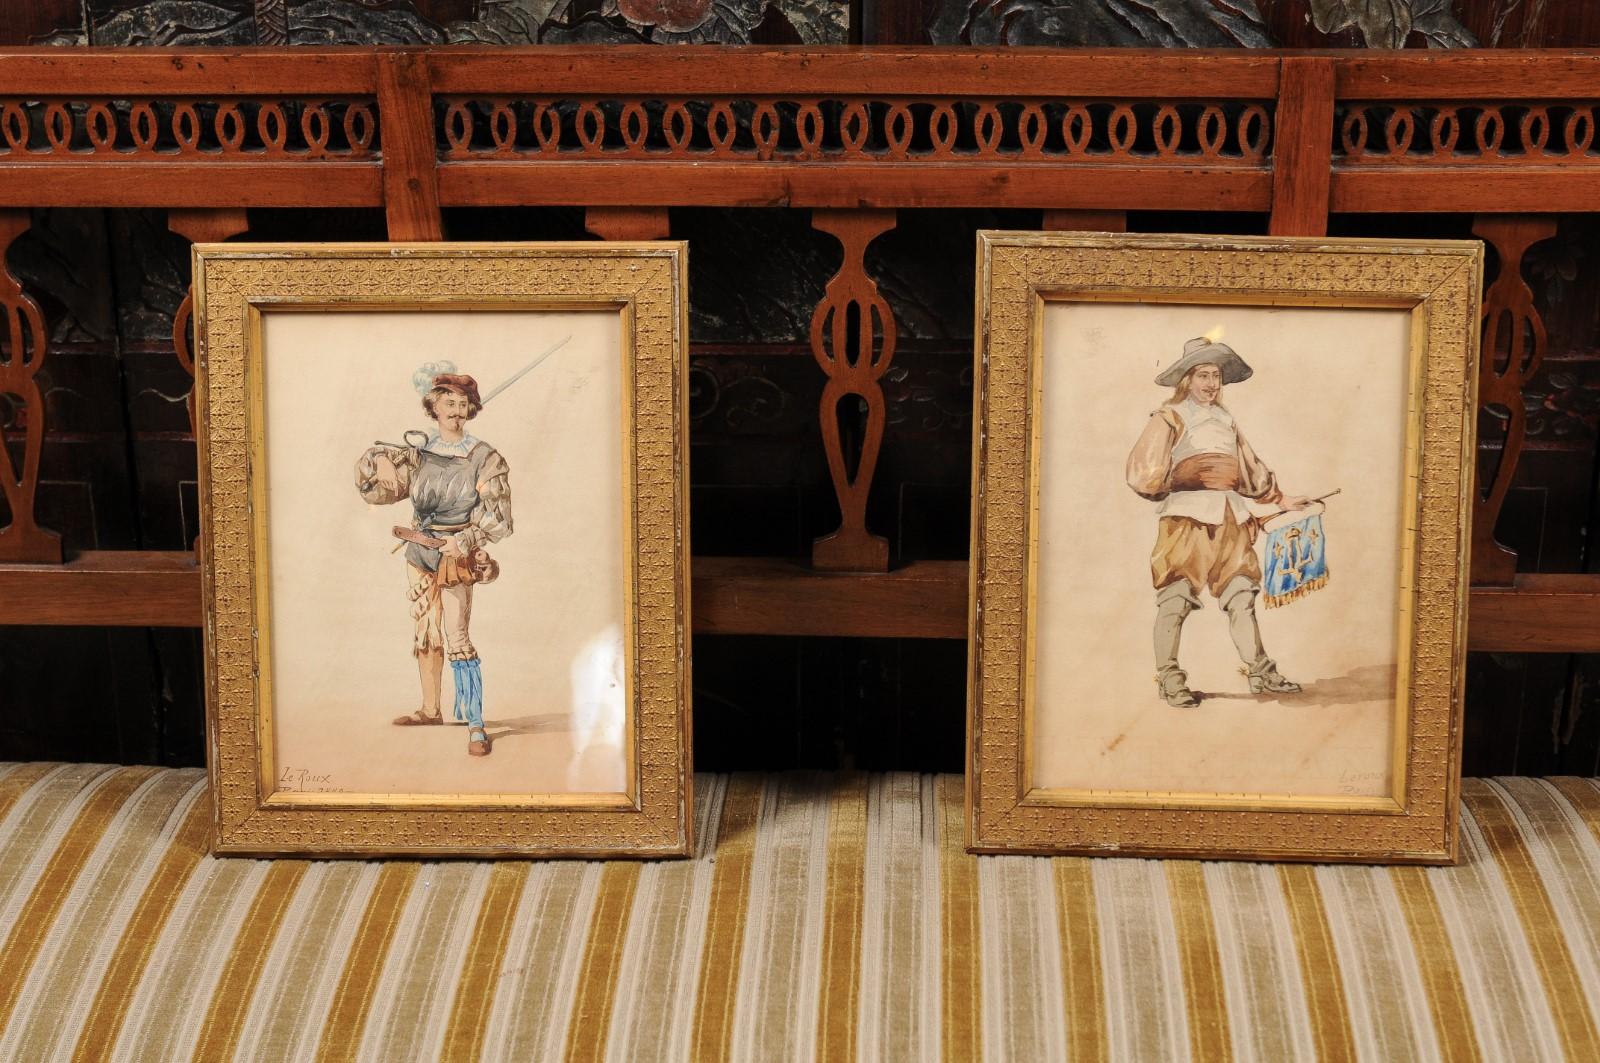 Pair of 19th century French giltwood framed watercolor paintings on men.